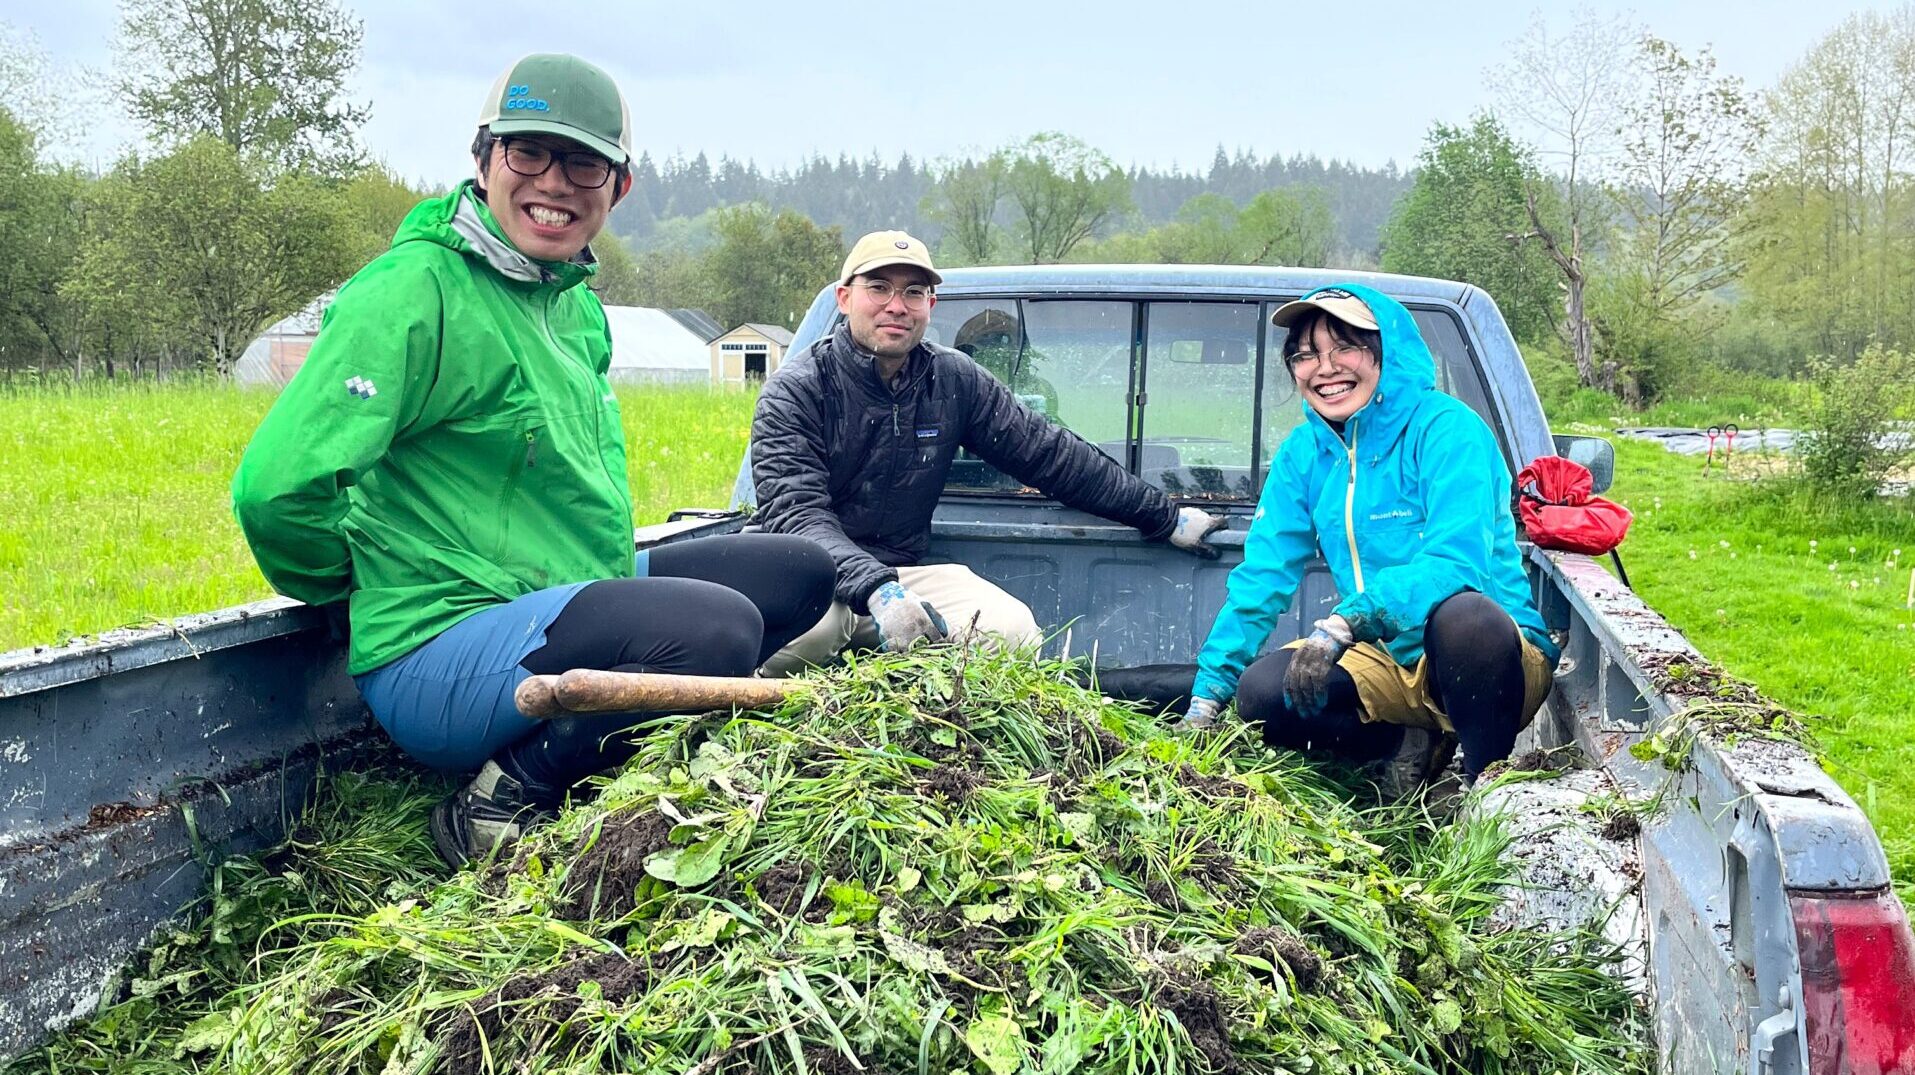 21 Acres volunteers sitting in the bed of a pickup truck loaded with the weeds pulled during a work party.